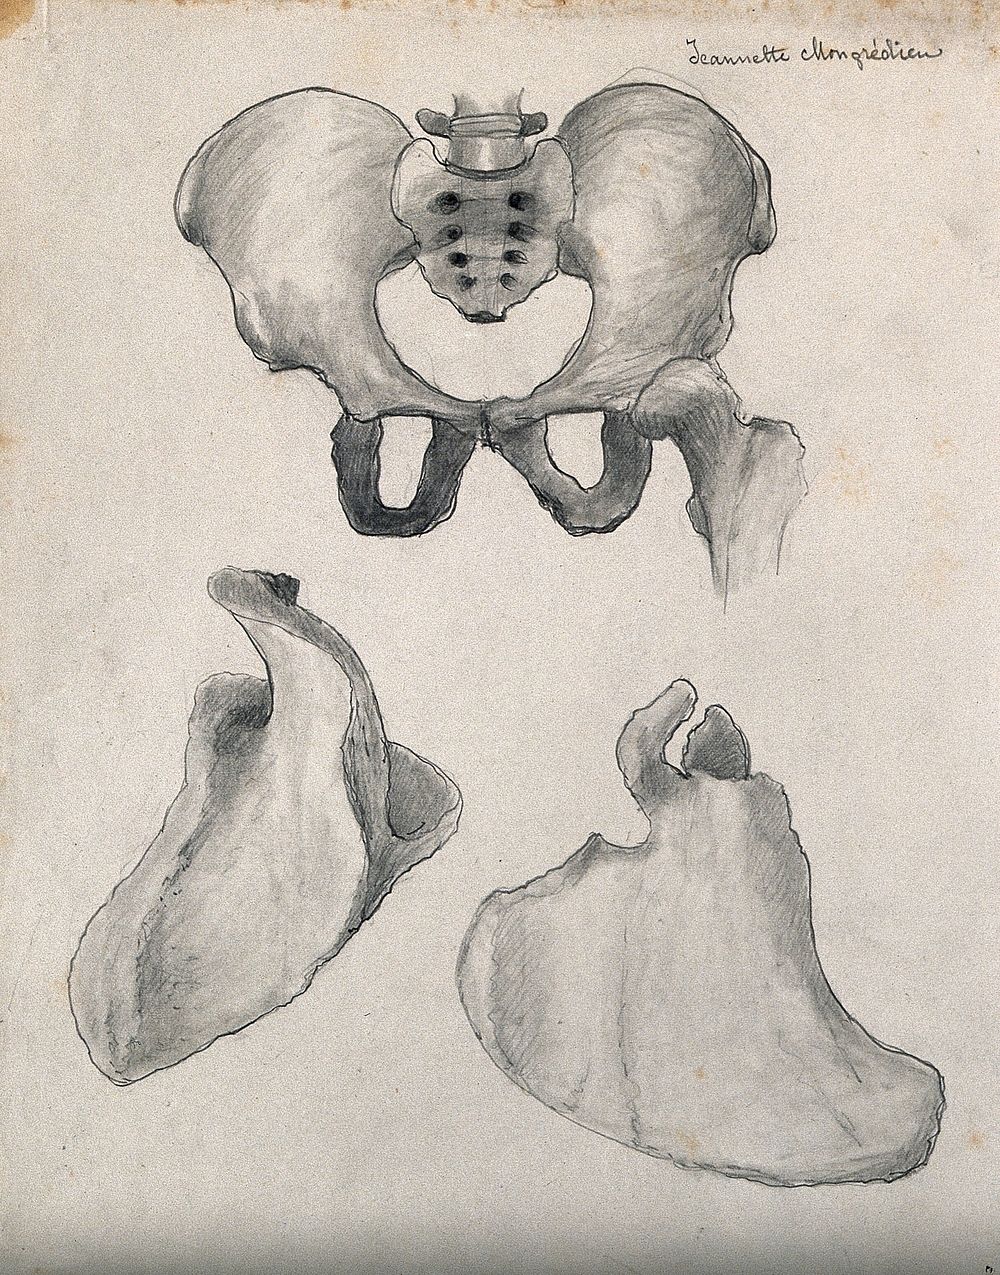 Bones of the pelvis and scapula: three figures. Pencil and chalk drawing by J. Mongrédien, ca. 1880.